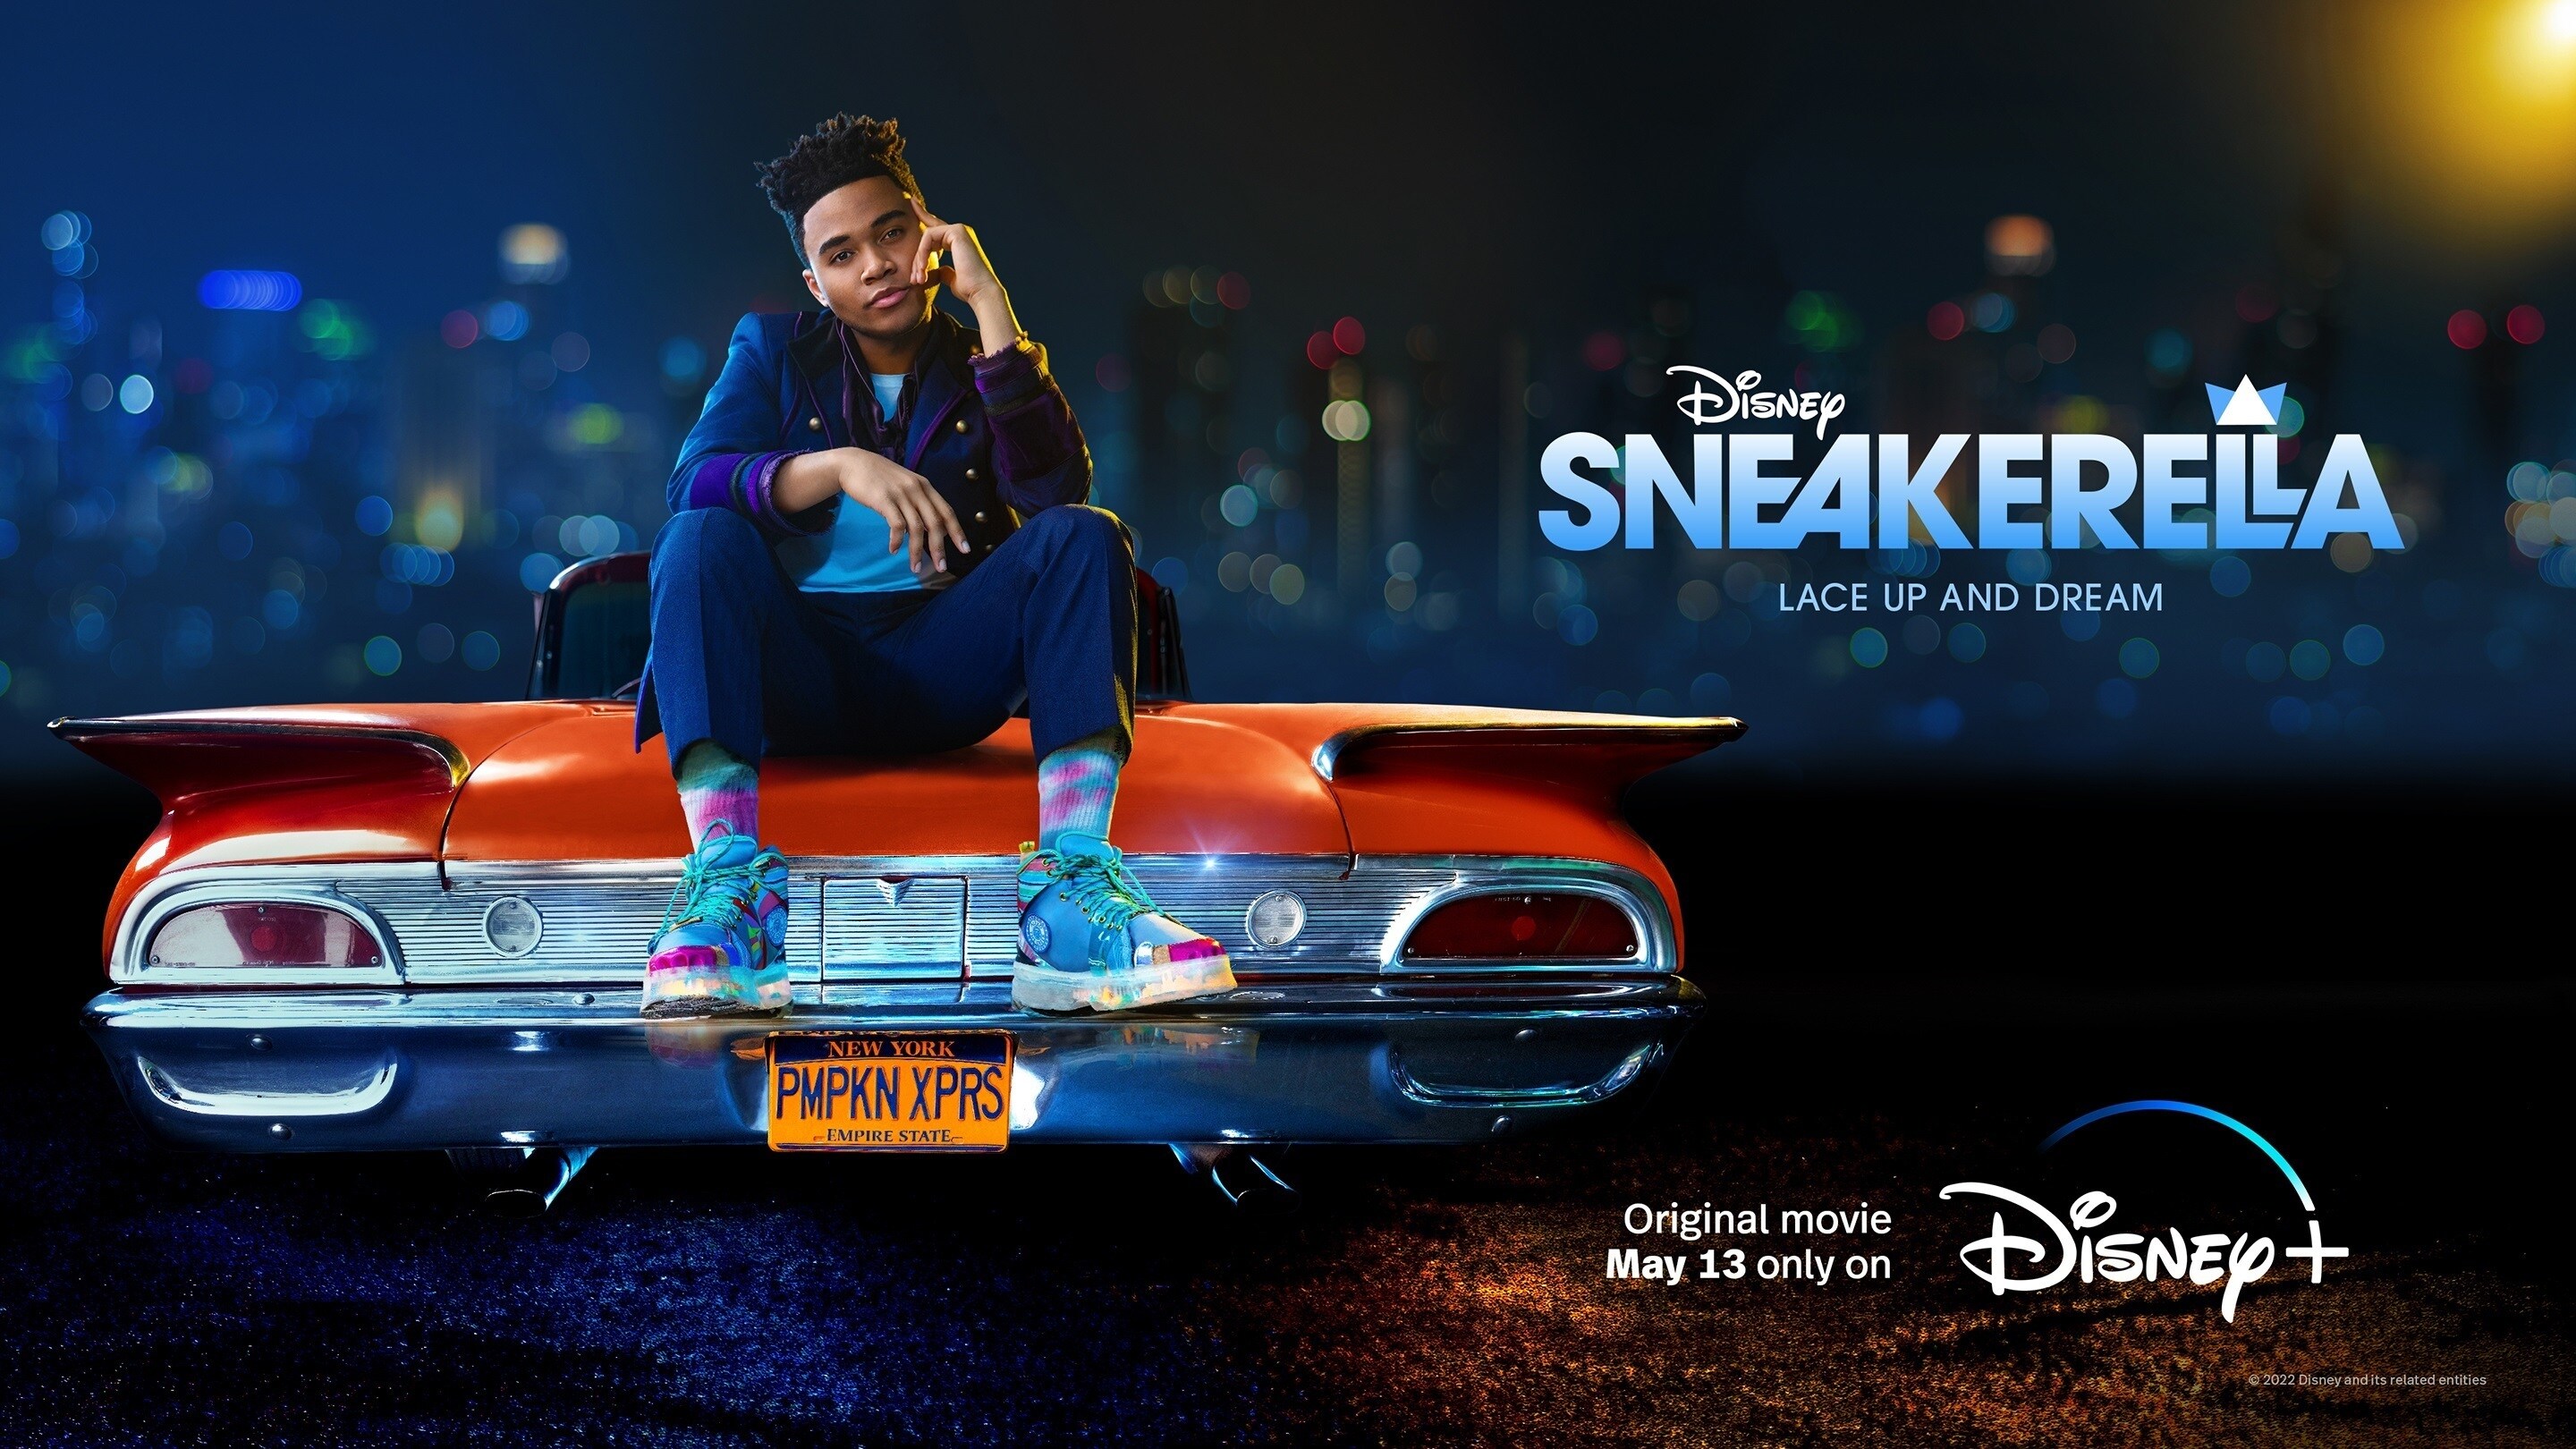 Lace Up And Dream Big With The New Trailer And Key Art For The Disney+ Original Movie “Sneakerella”